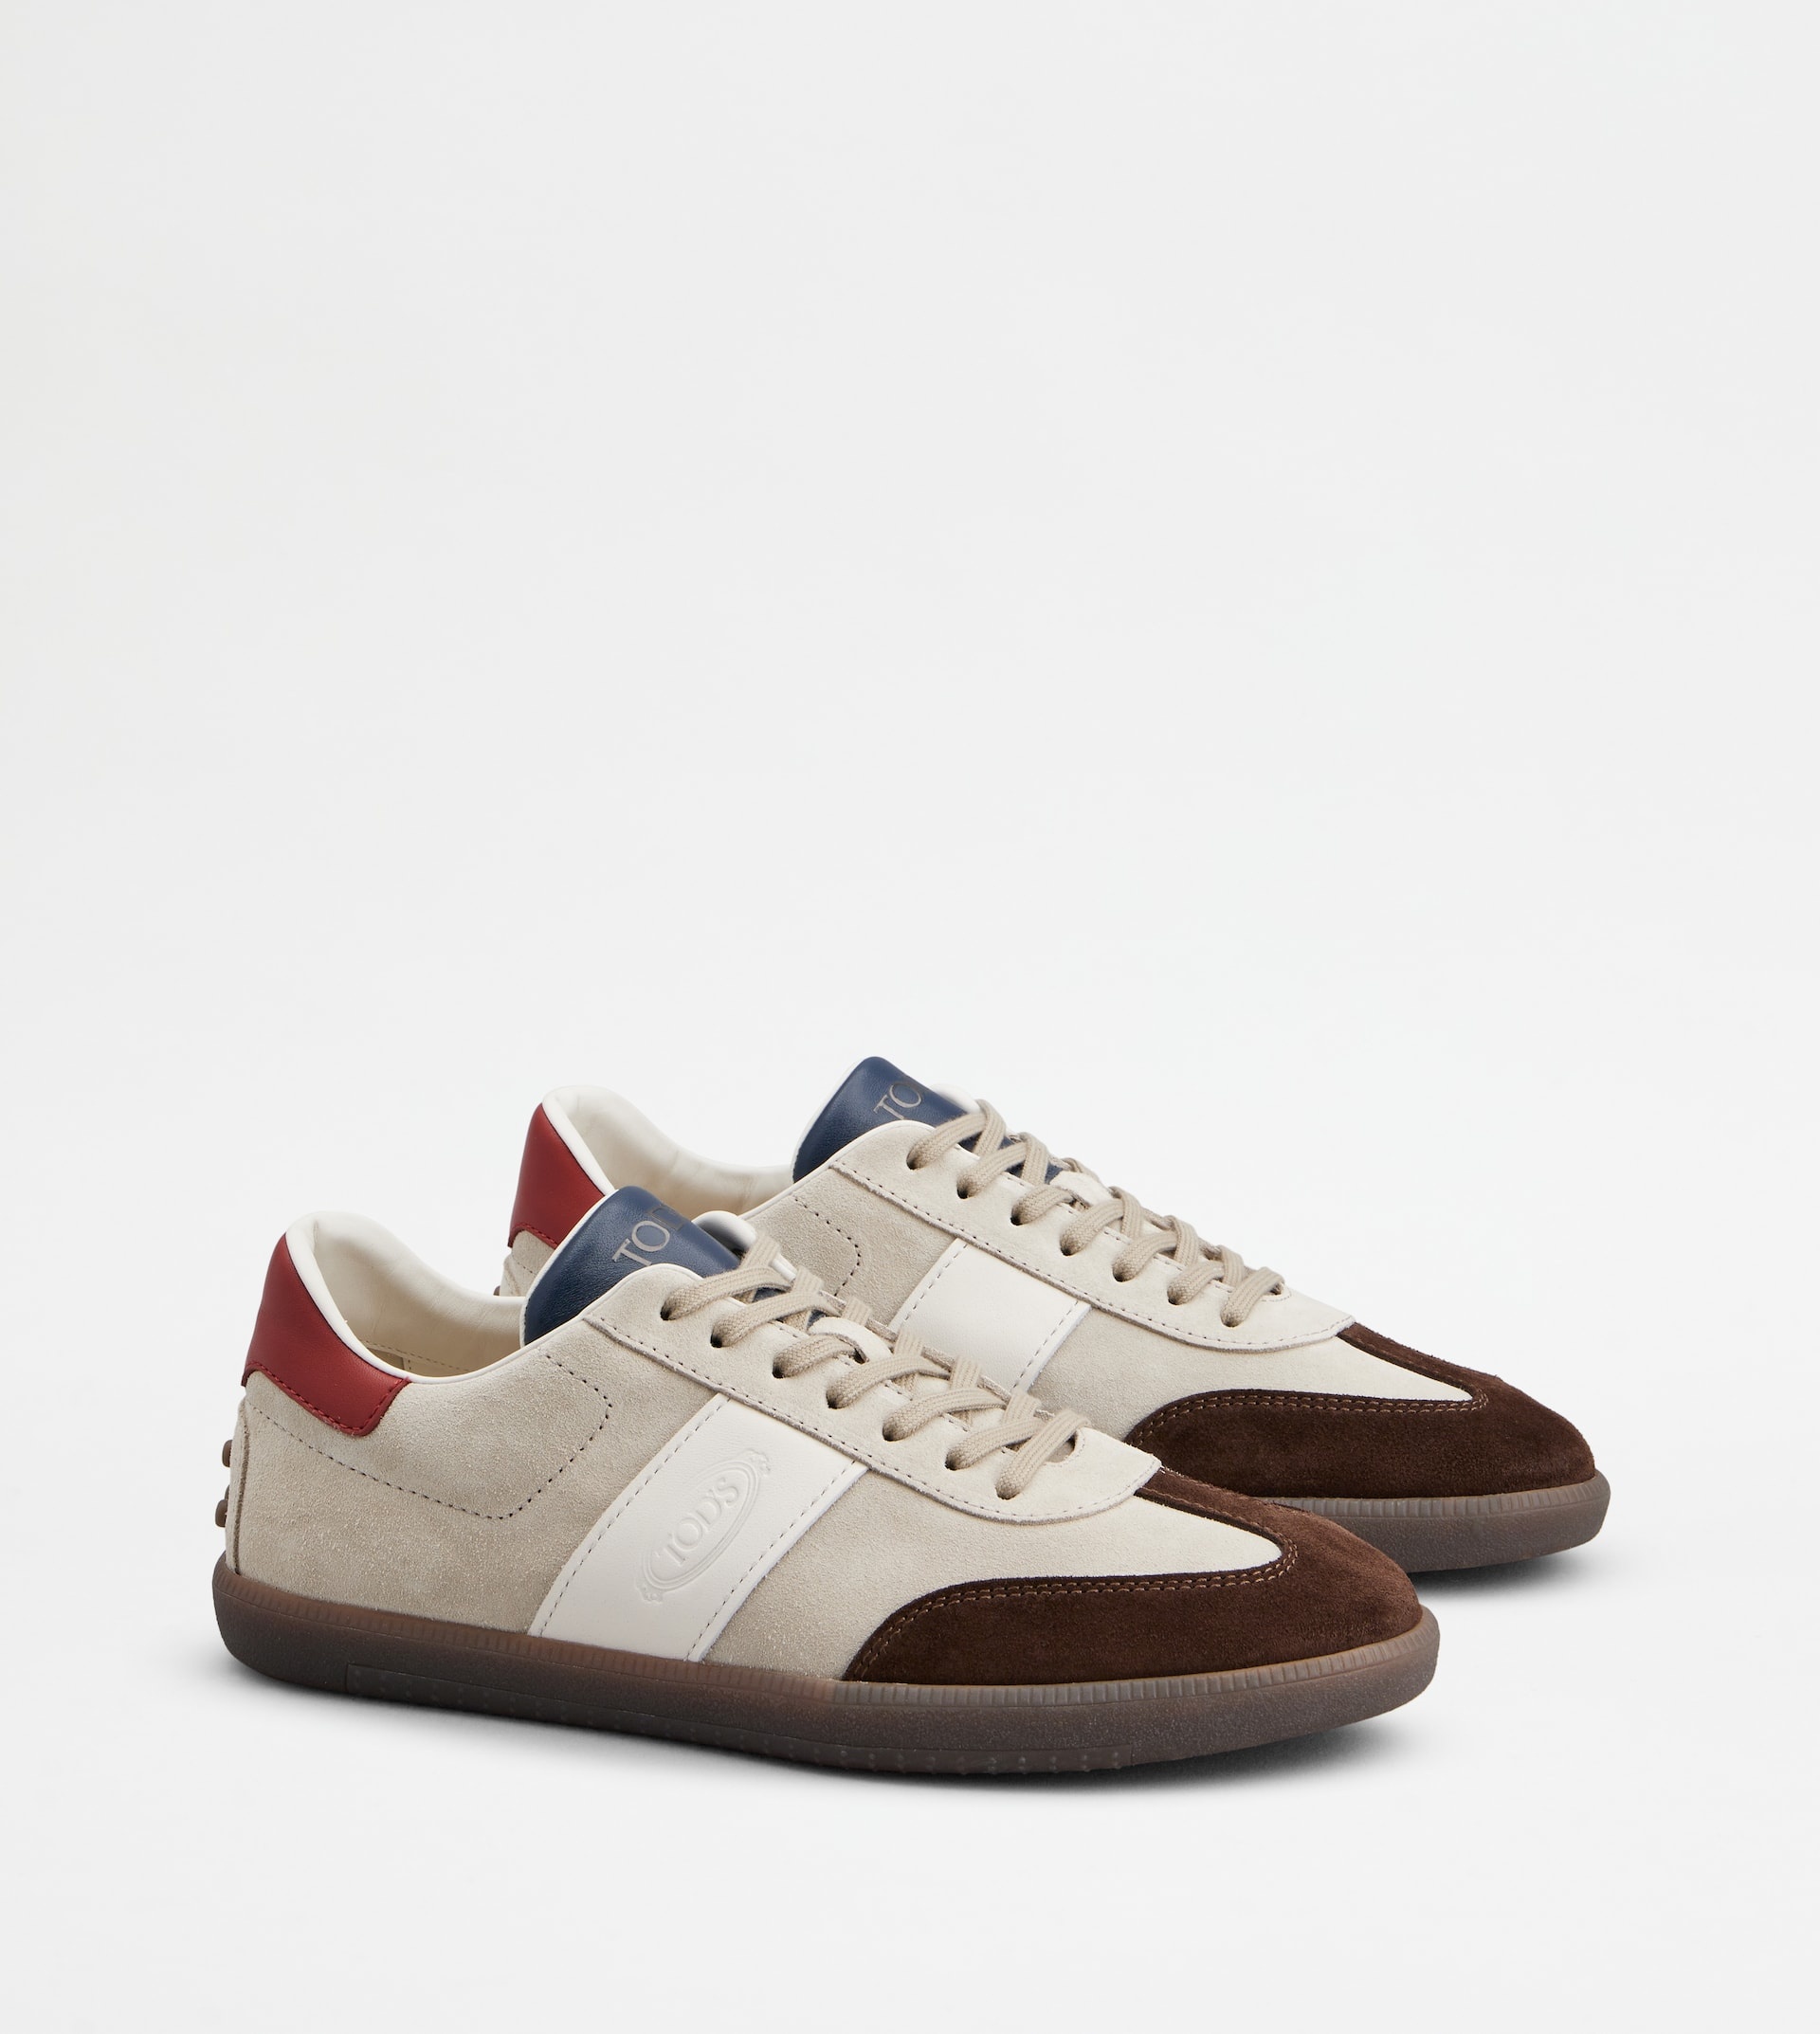 TOD'S TABS SNEAKERS IN SUEDE - BEIGE, WHITE, BROWN, RED - 3